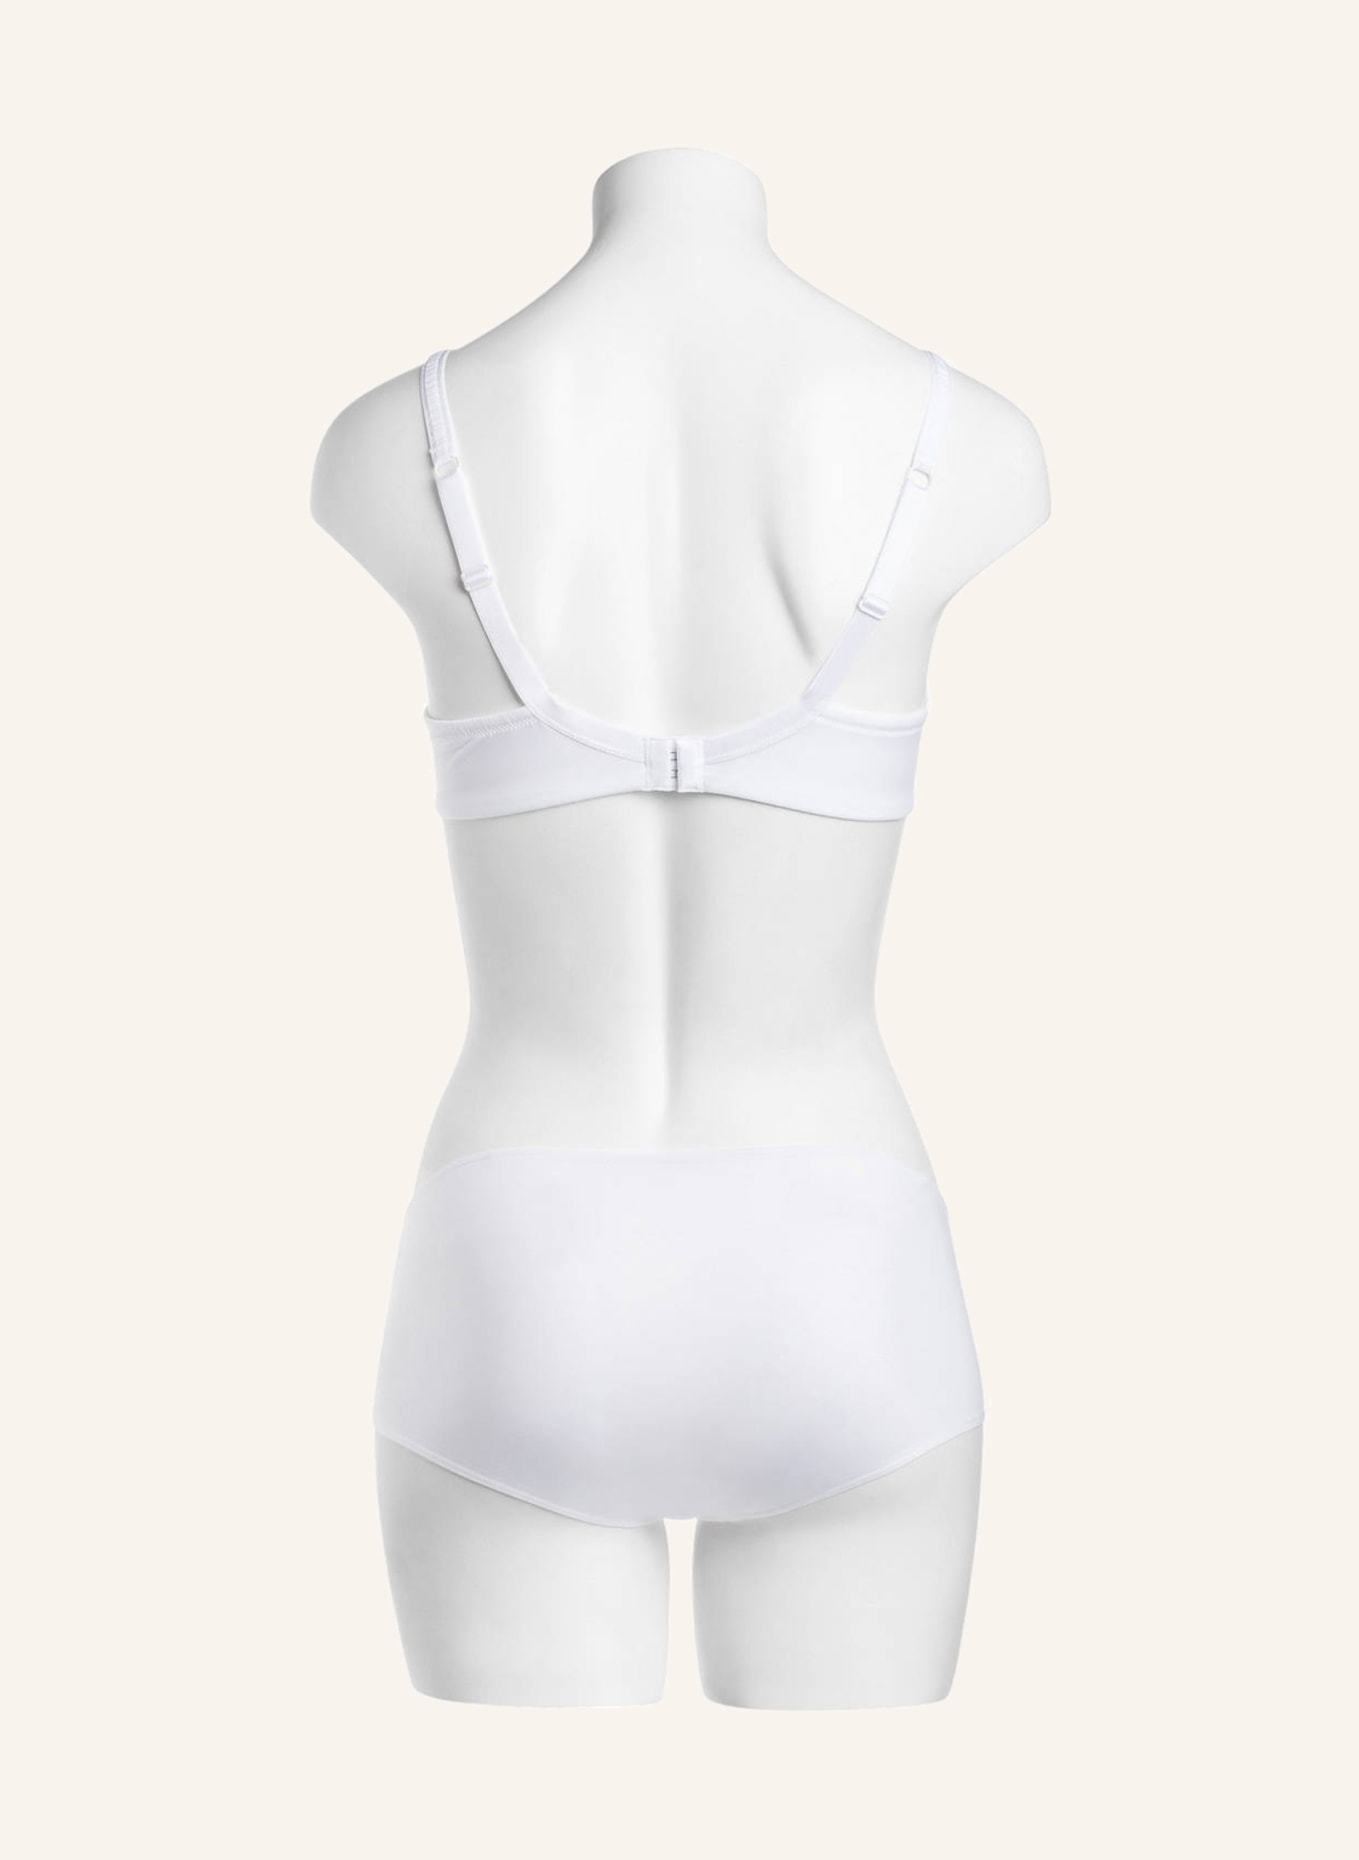 mey Spacer bra series JOAN, Color: WHITE (Image 3)